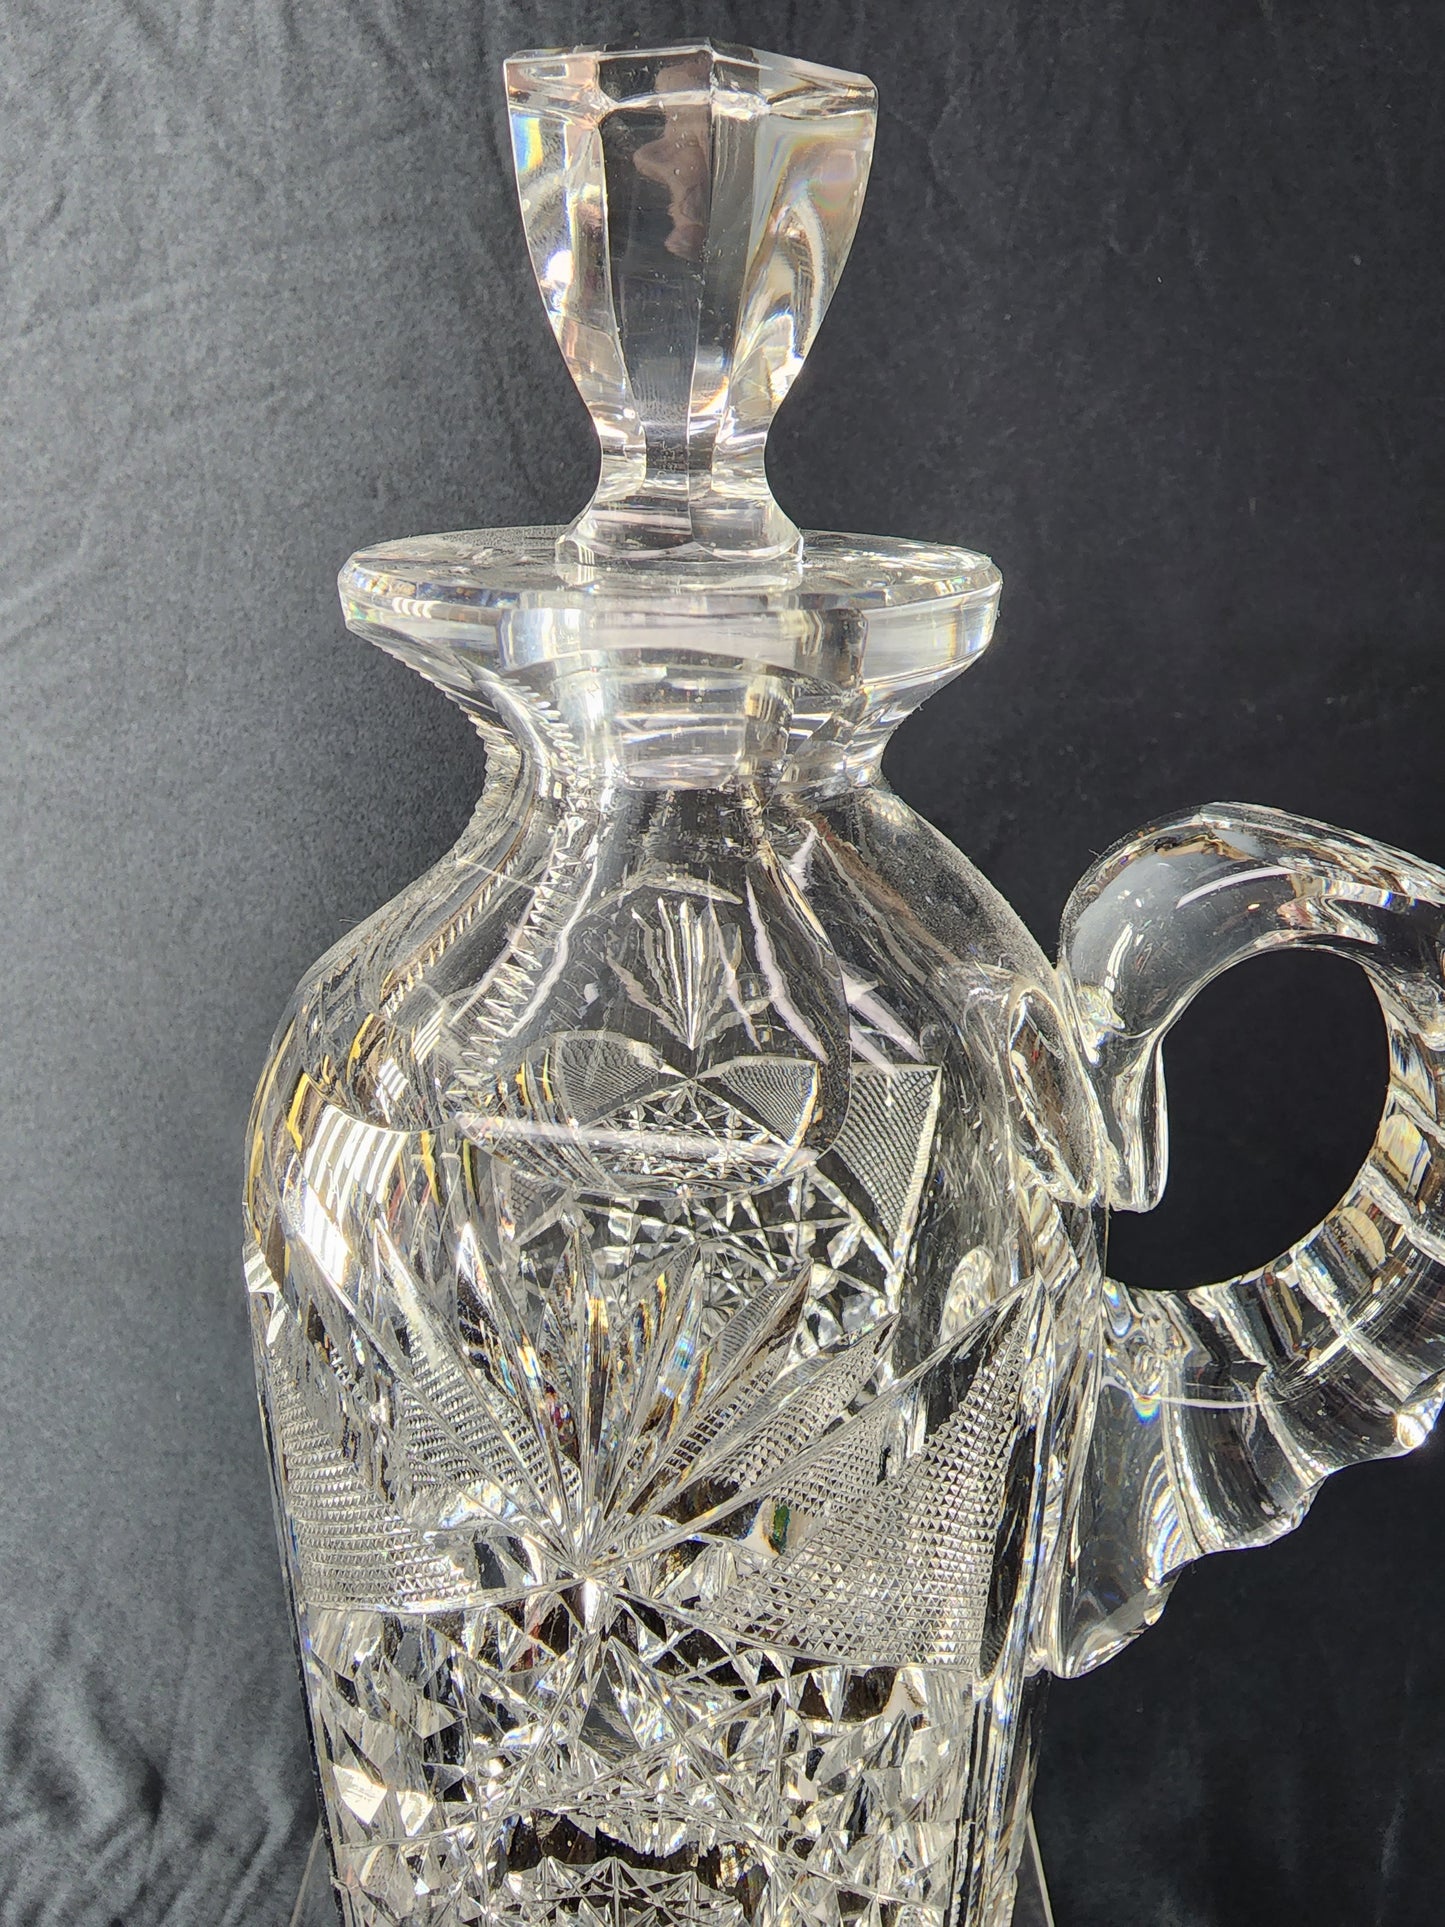 Hand Cut Glass ABP handled whiskey Decanter